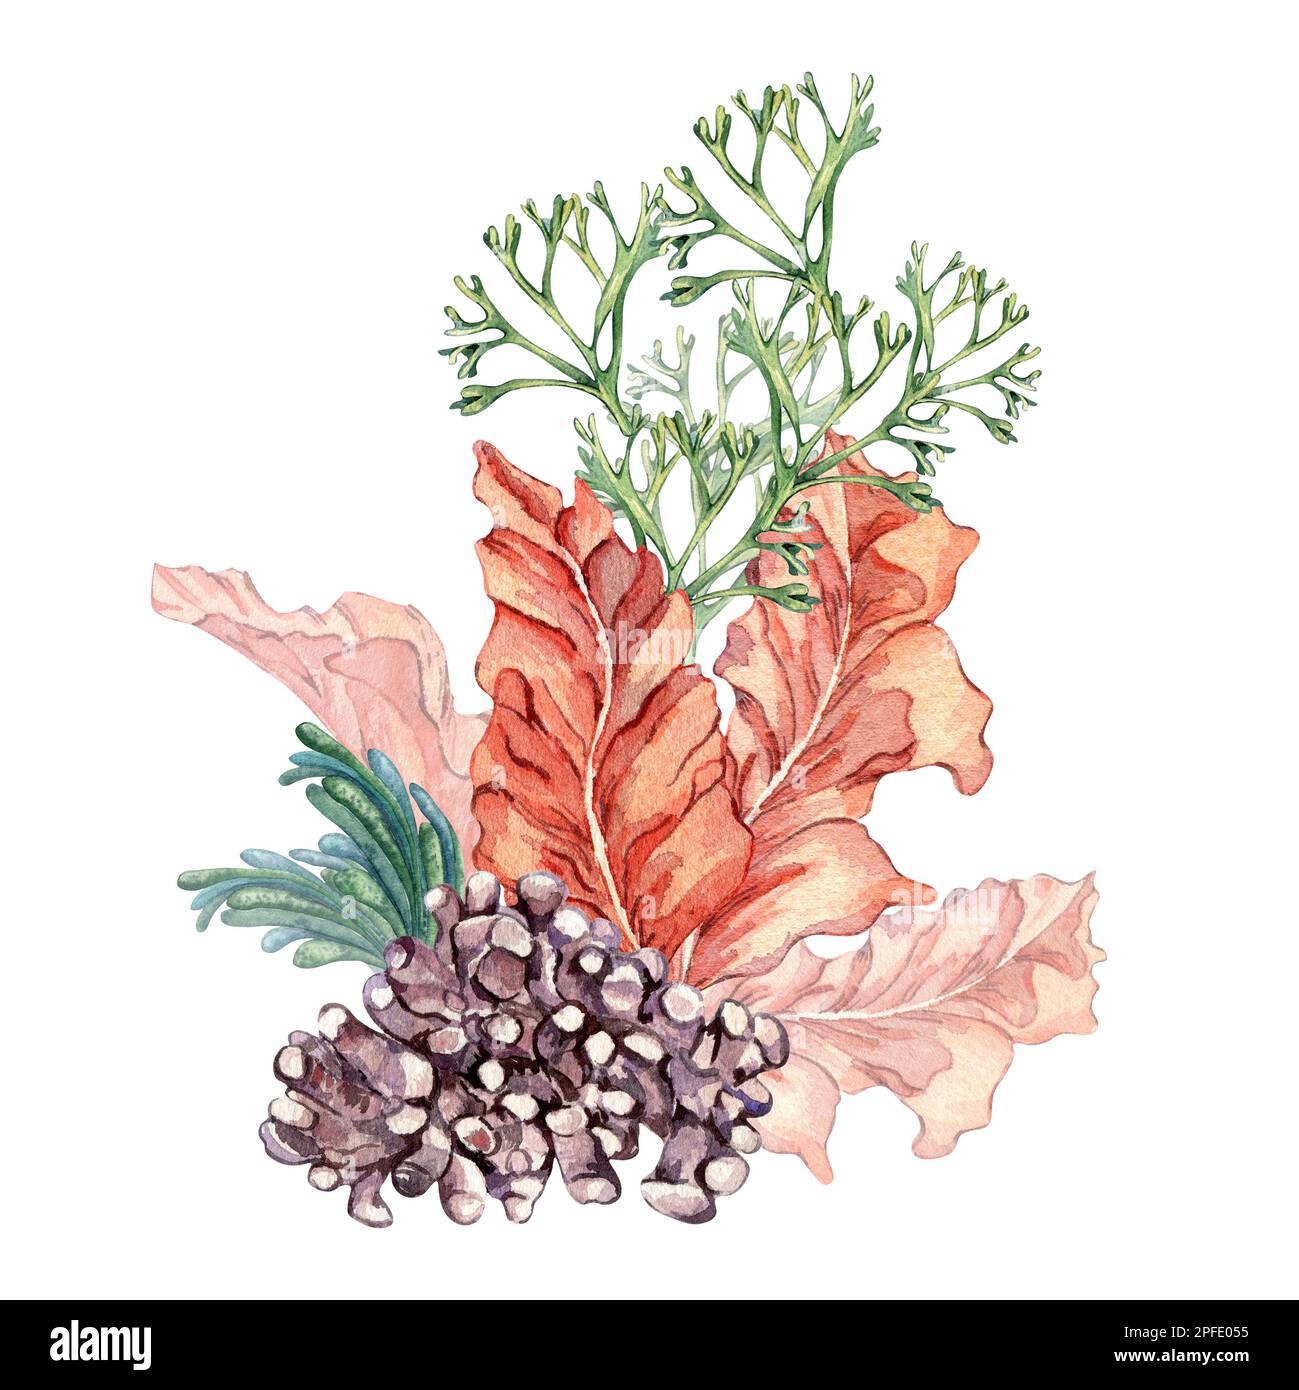 Composition of colorful sea plants watercolor illustration isolated on white. Red porphyra, , purple coral, codium, spirulina hand drawn. Design eleme Stock Photo